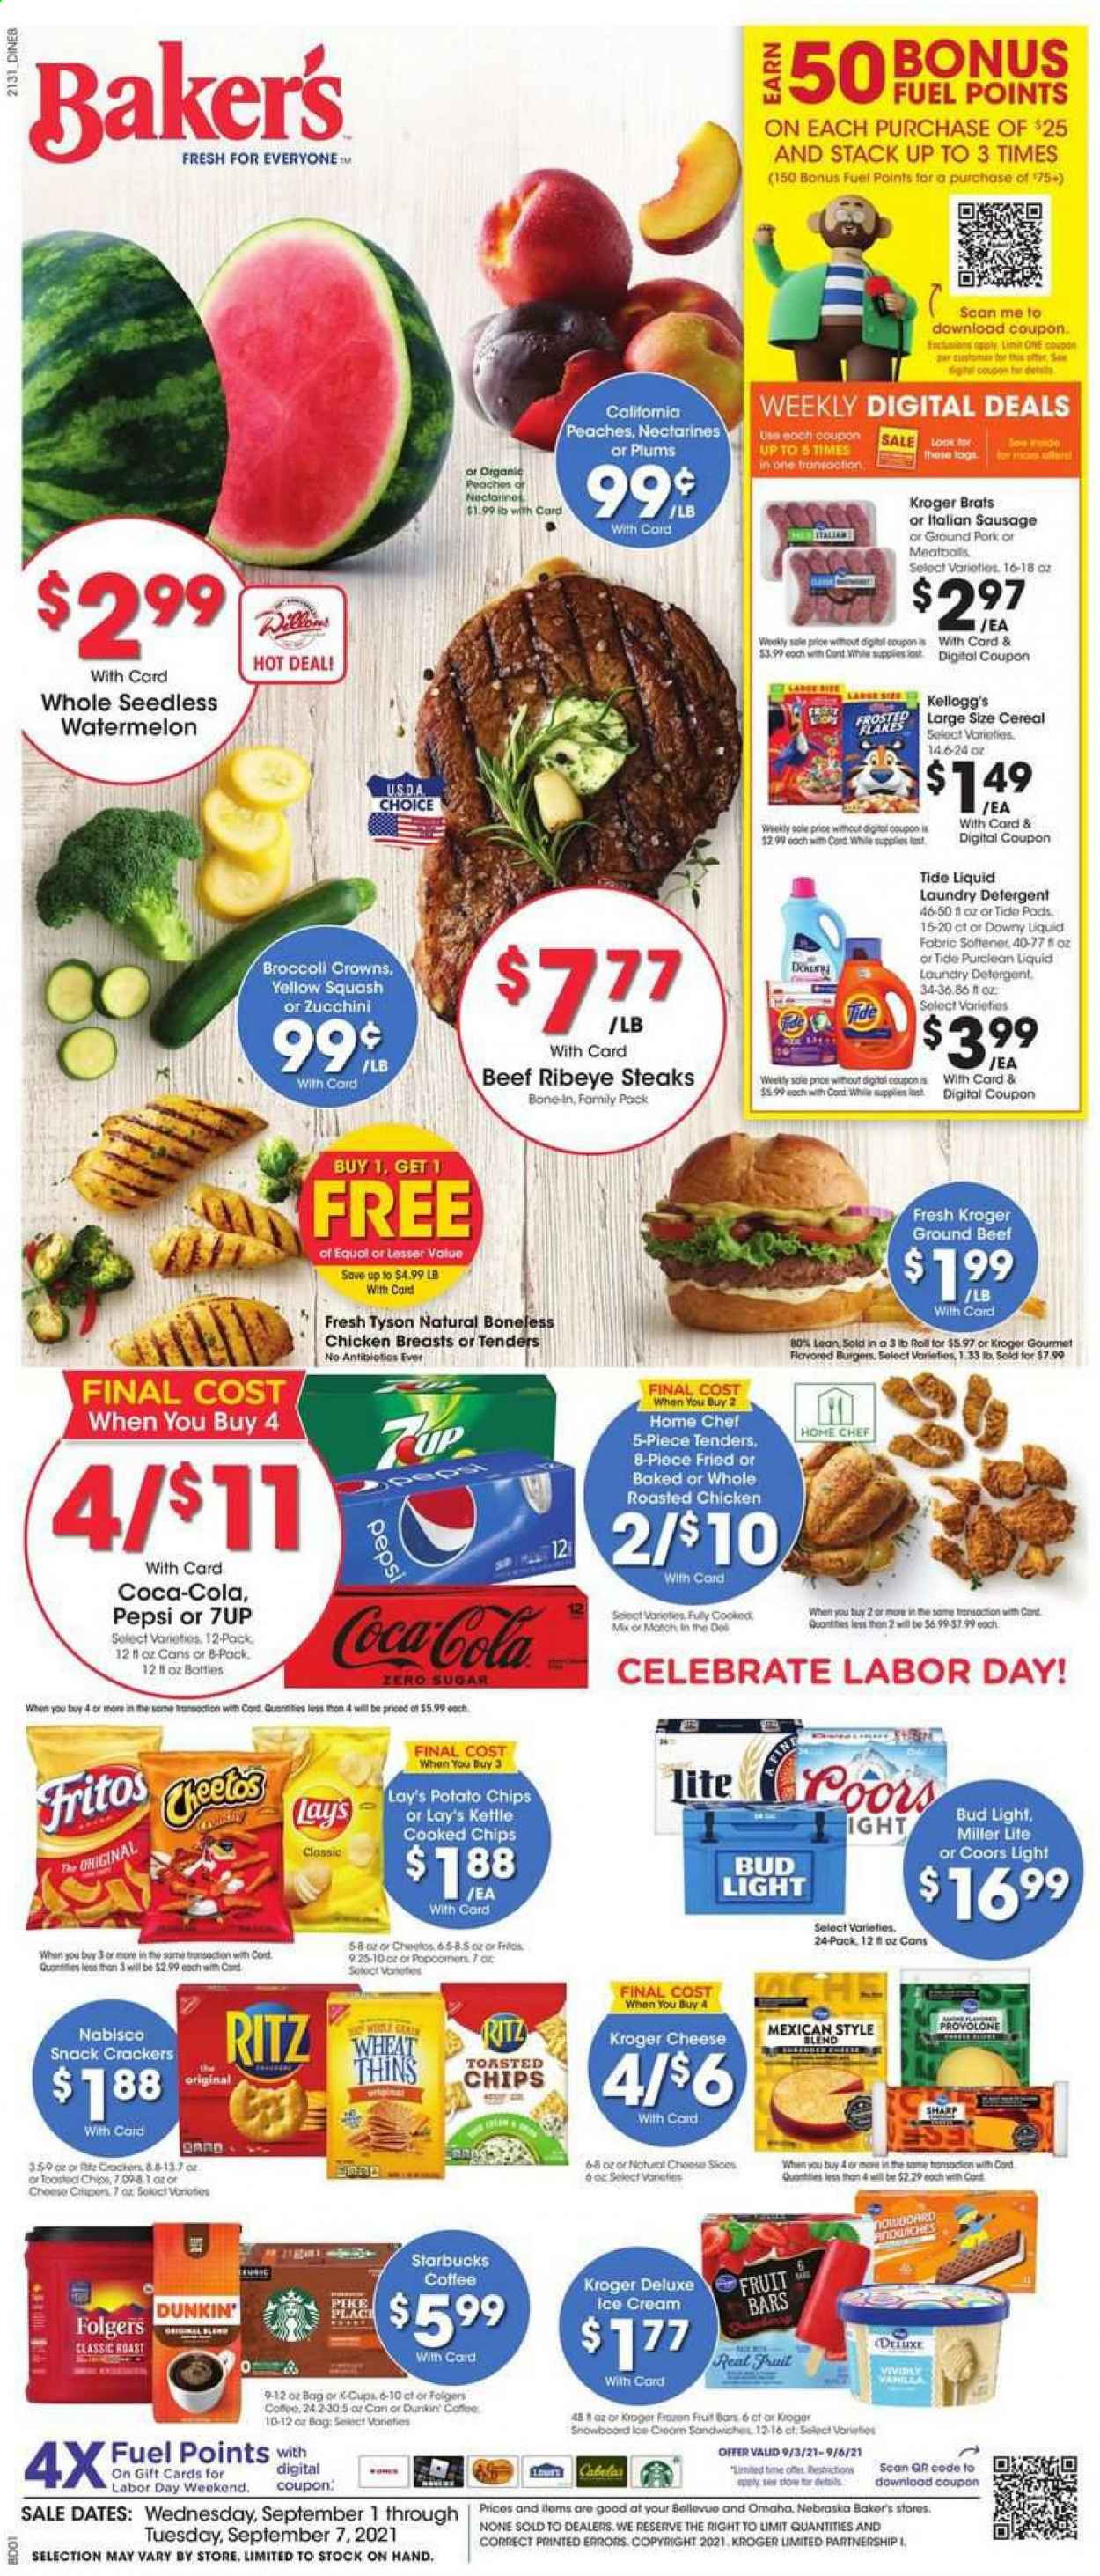 thumbnail - Baker's Flyer - 09/01/2021 - 09/07/2021 - Sales products - plums, zucchini, yellow squash, watermelon, chicken roast, meatballs, sausage, italian sausage, cheese, ice cream, snack, crackers, Kellogg's, RITZ, Fritos, potato chips, chips, Lay’s, Thins, cereals, Frosted Flakes, Coca-Cola, Pepsi, 7UP, coffee, Starbucks, Folgers, beer, Bud Light, chicken breasts, beef meat, ground beef, steak, ribeye steak, ground pork, detergent, Tide, laundry detergent, Downy Laundry, Sharp, Miller Lite, nectarines, Coors, peaches. Page 1.